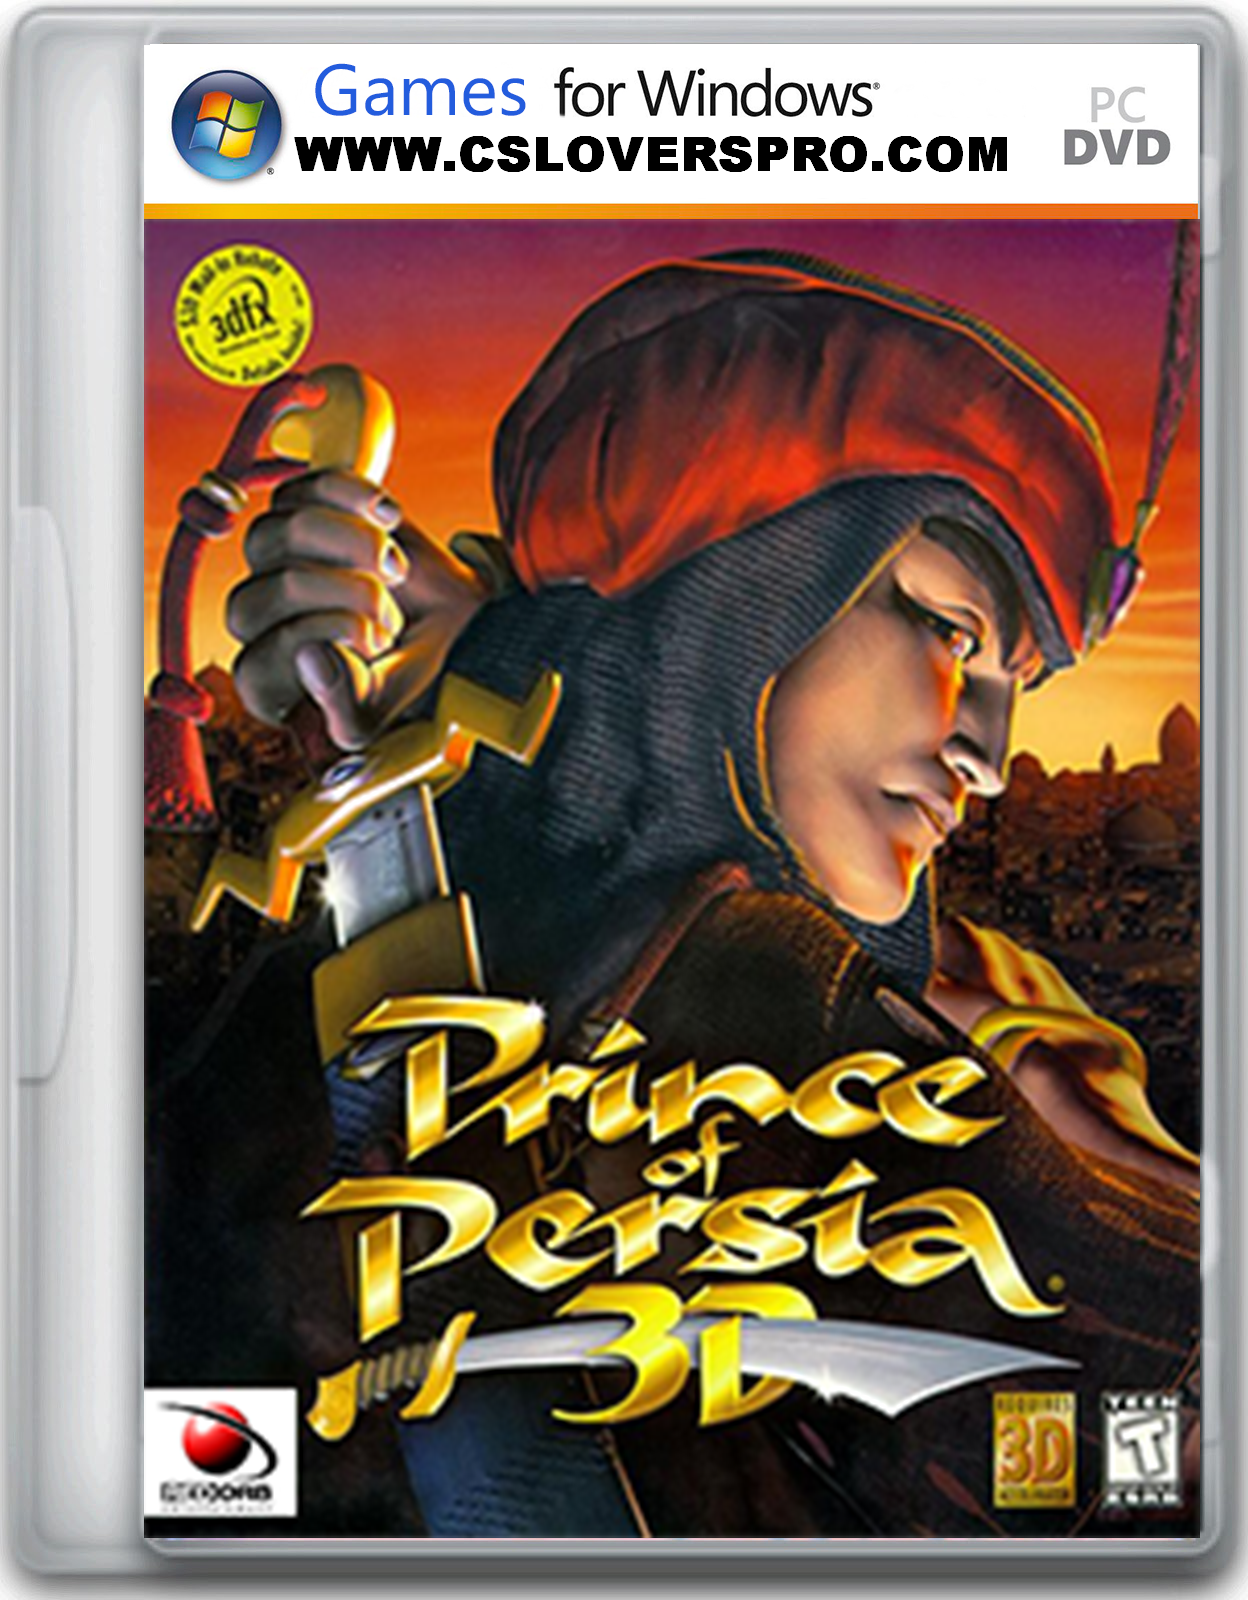 Prince of Persia 3D Free Download Torrent